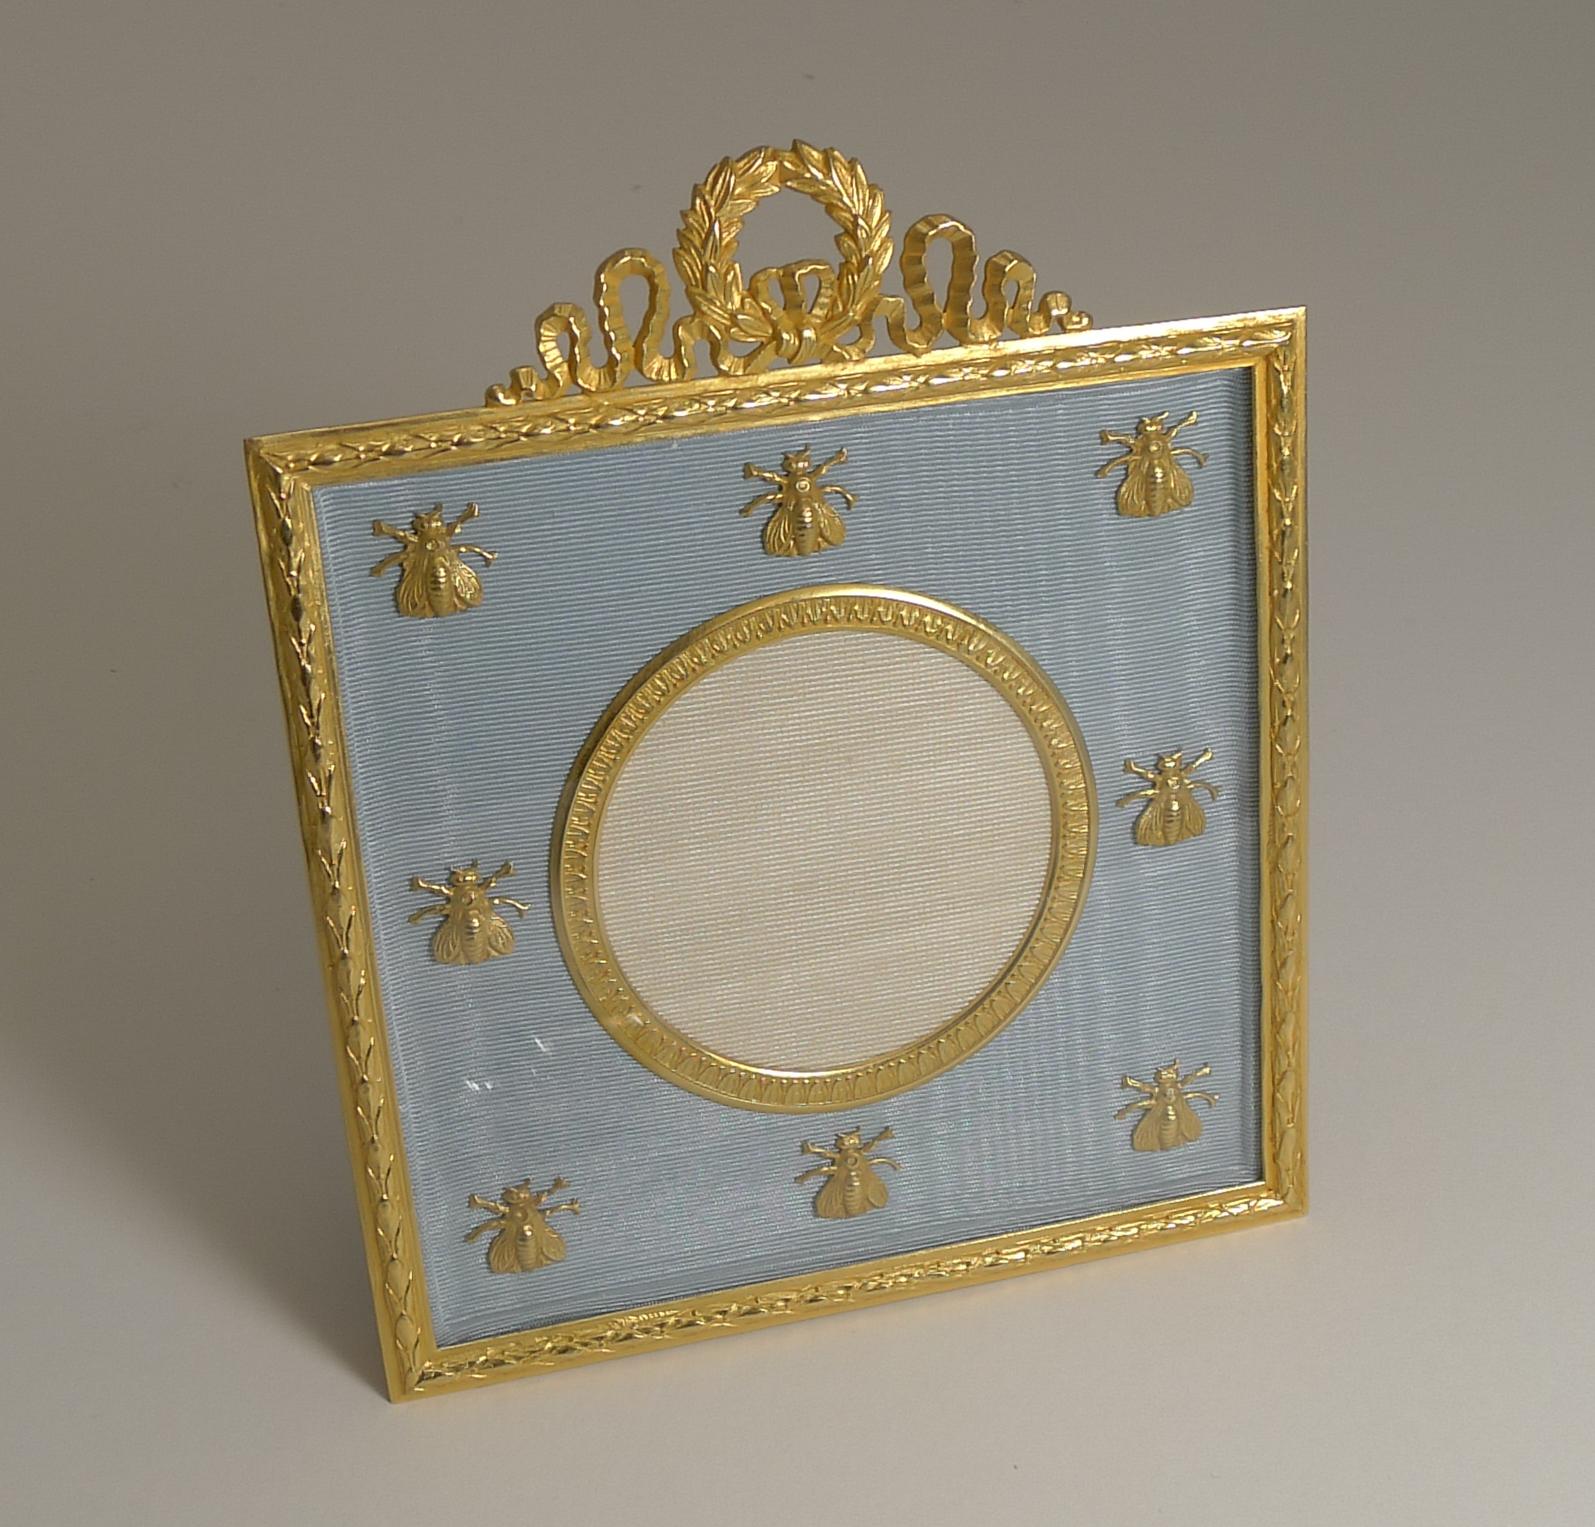 A charming and highly decorative photograph frame made from Ormolu or gilded bronze; the silk taffeta mounted with a series of gilded bronze Napoleonic bees protected with a glass front.

Professionally restored to it's former glory, the frame is